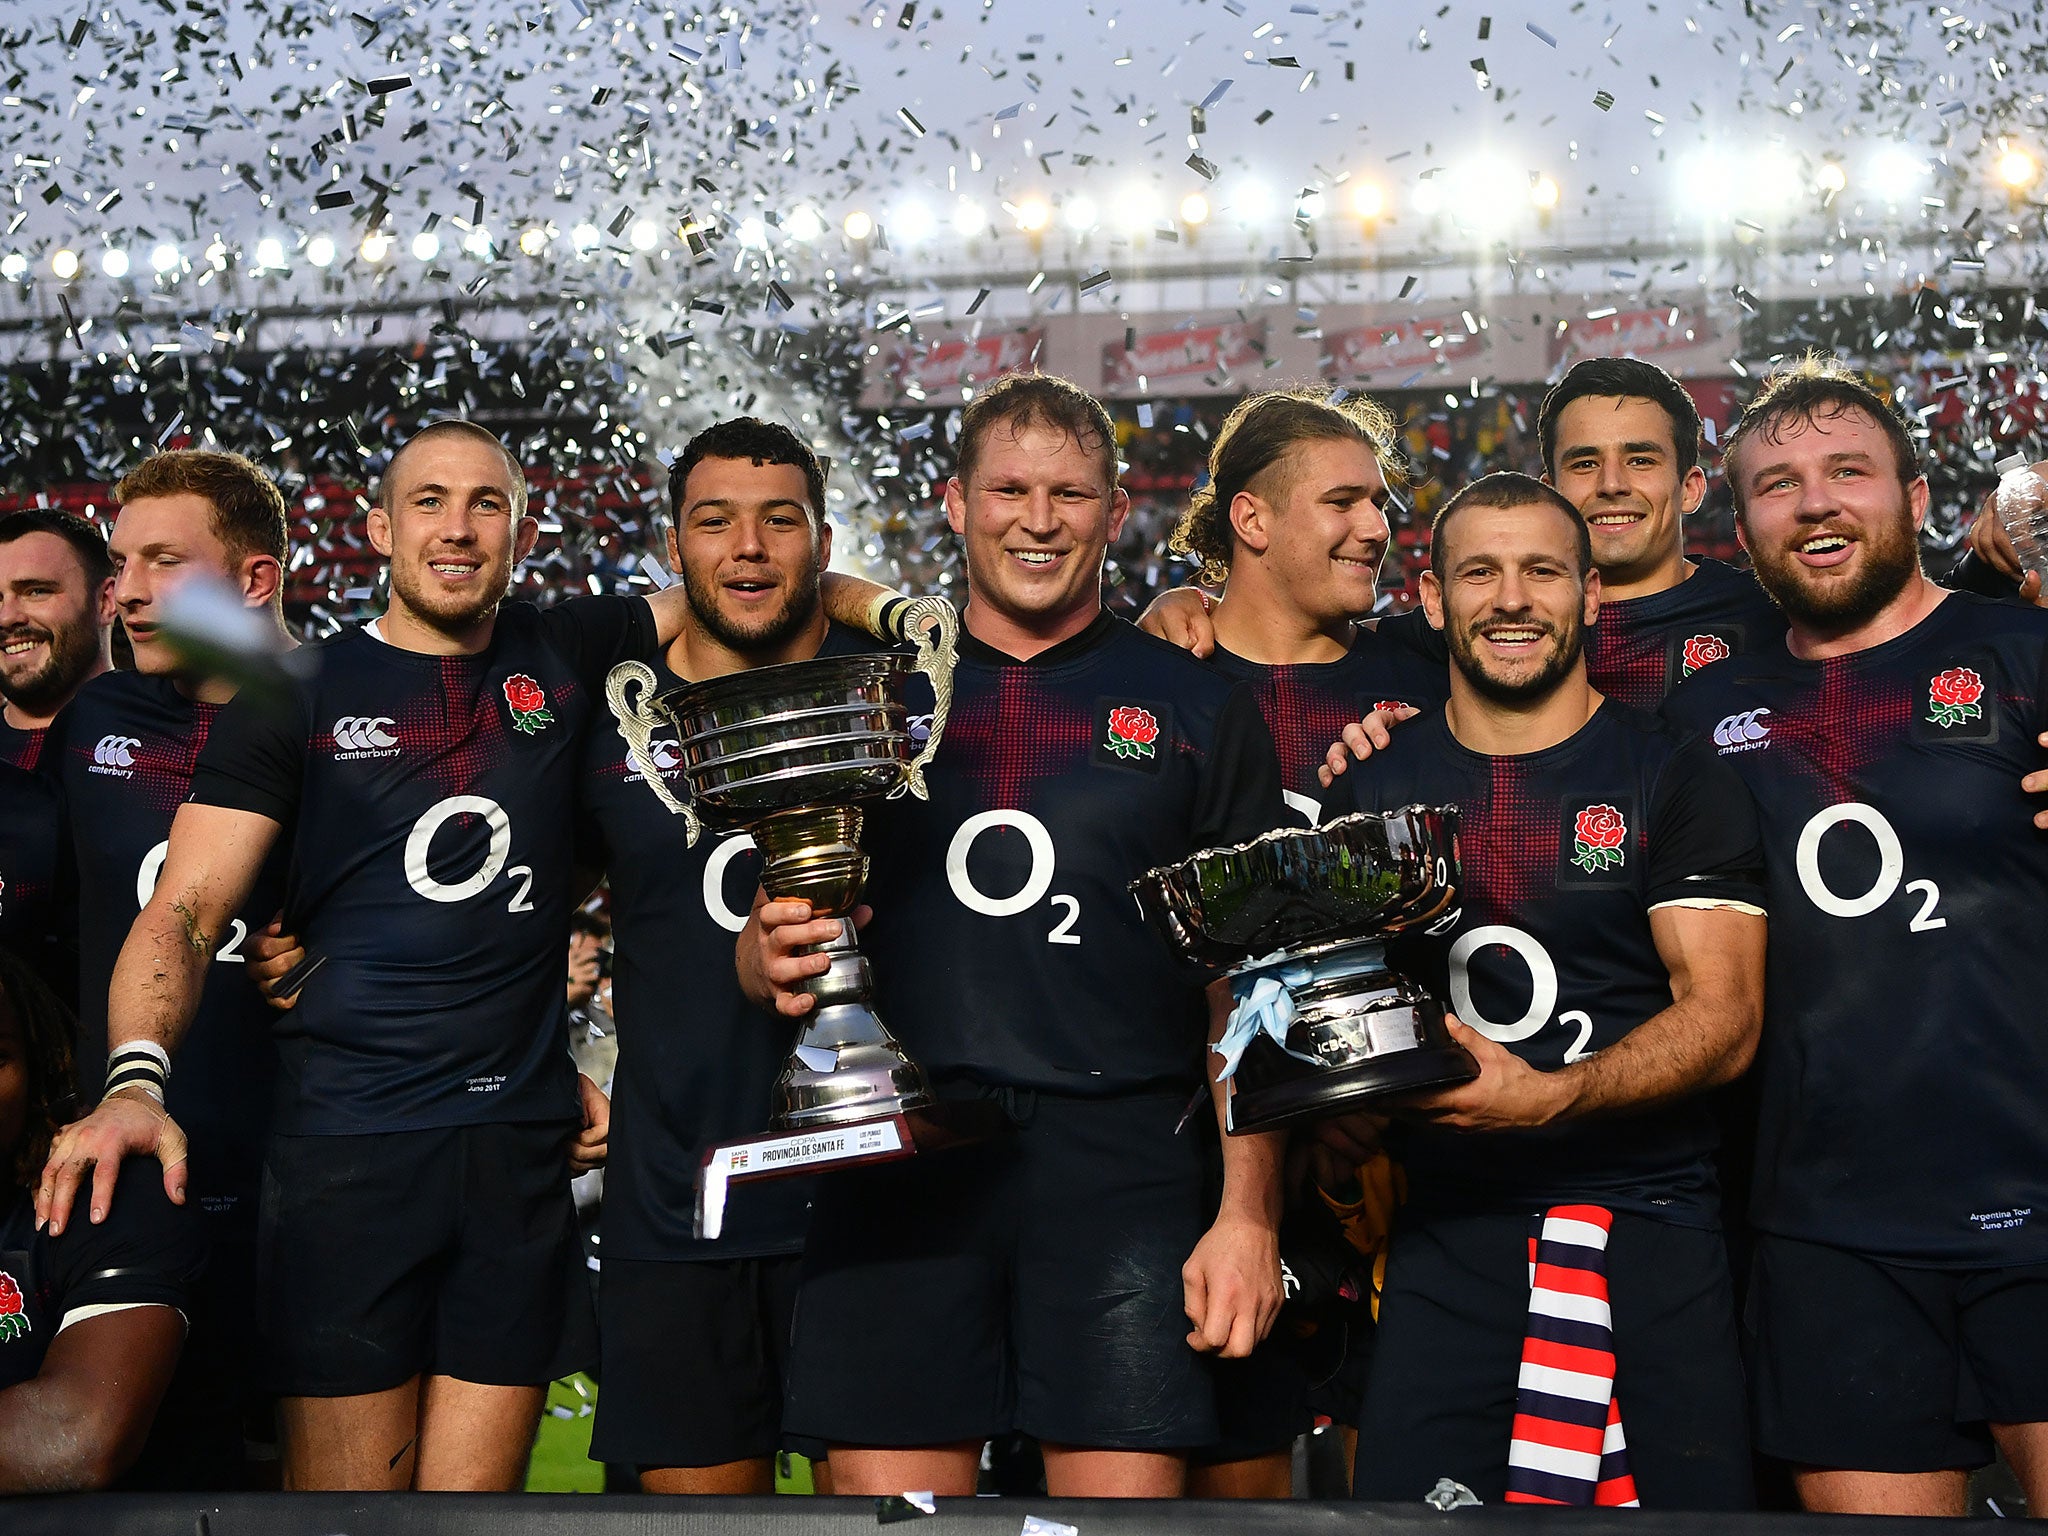 Dylan Hartley with his team mates following victory during the ICBC Cup match between Argentina and England at Estadio Brigadier General Estanislao Lopez on on 17 June